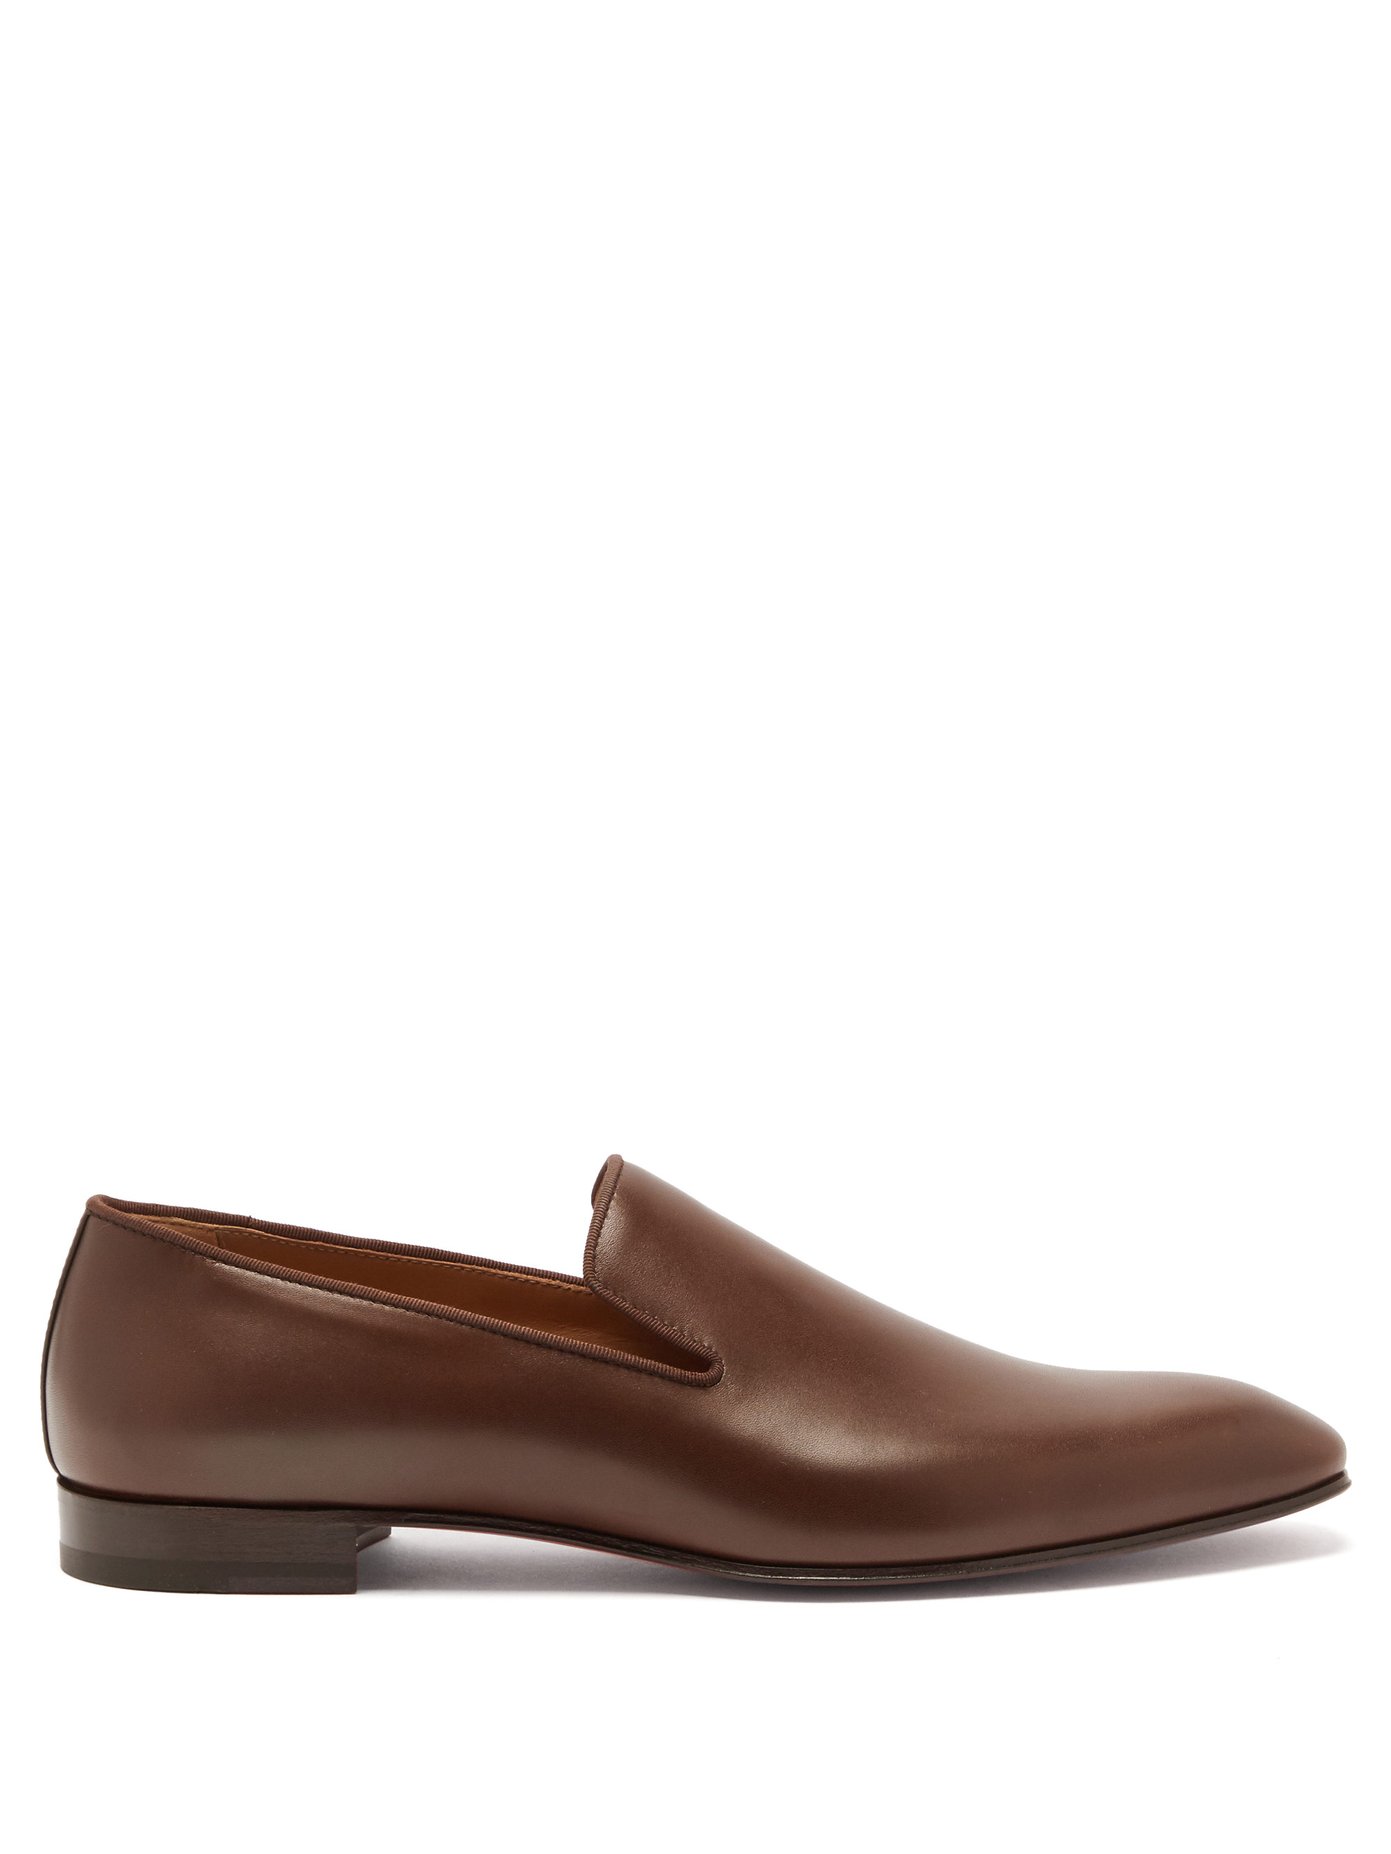 Dandelion leather loafers | Christian 